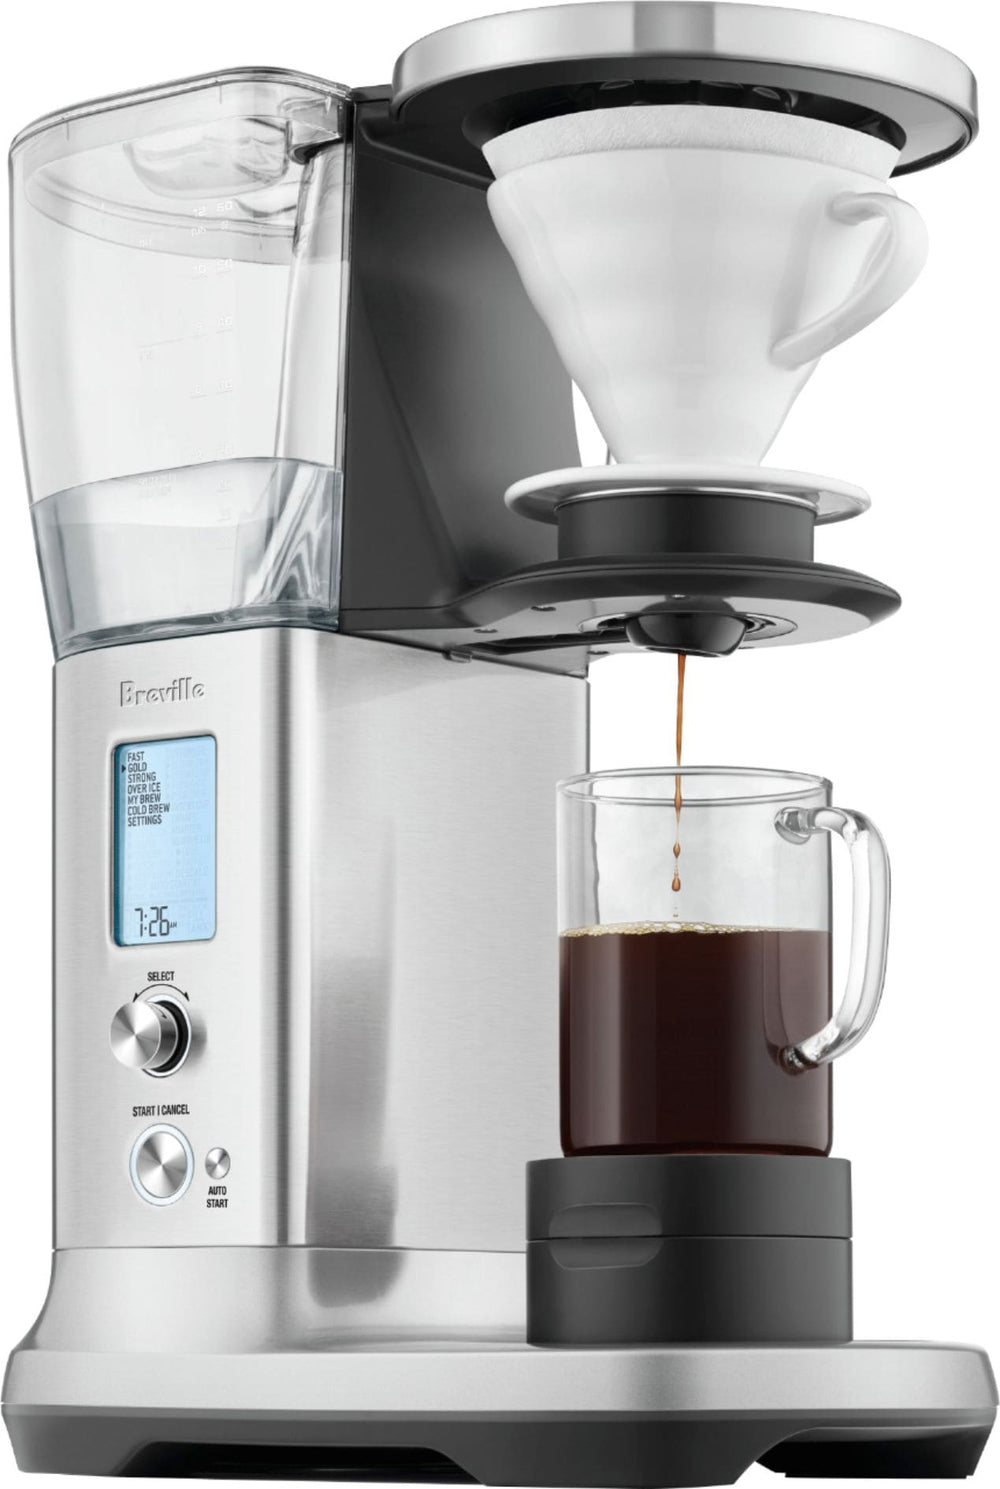 Breville - the Precision Brewer Thermal 12-Cup Coffee Maker - Brushed Stainless Steel_1